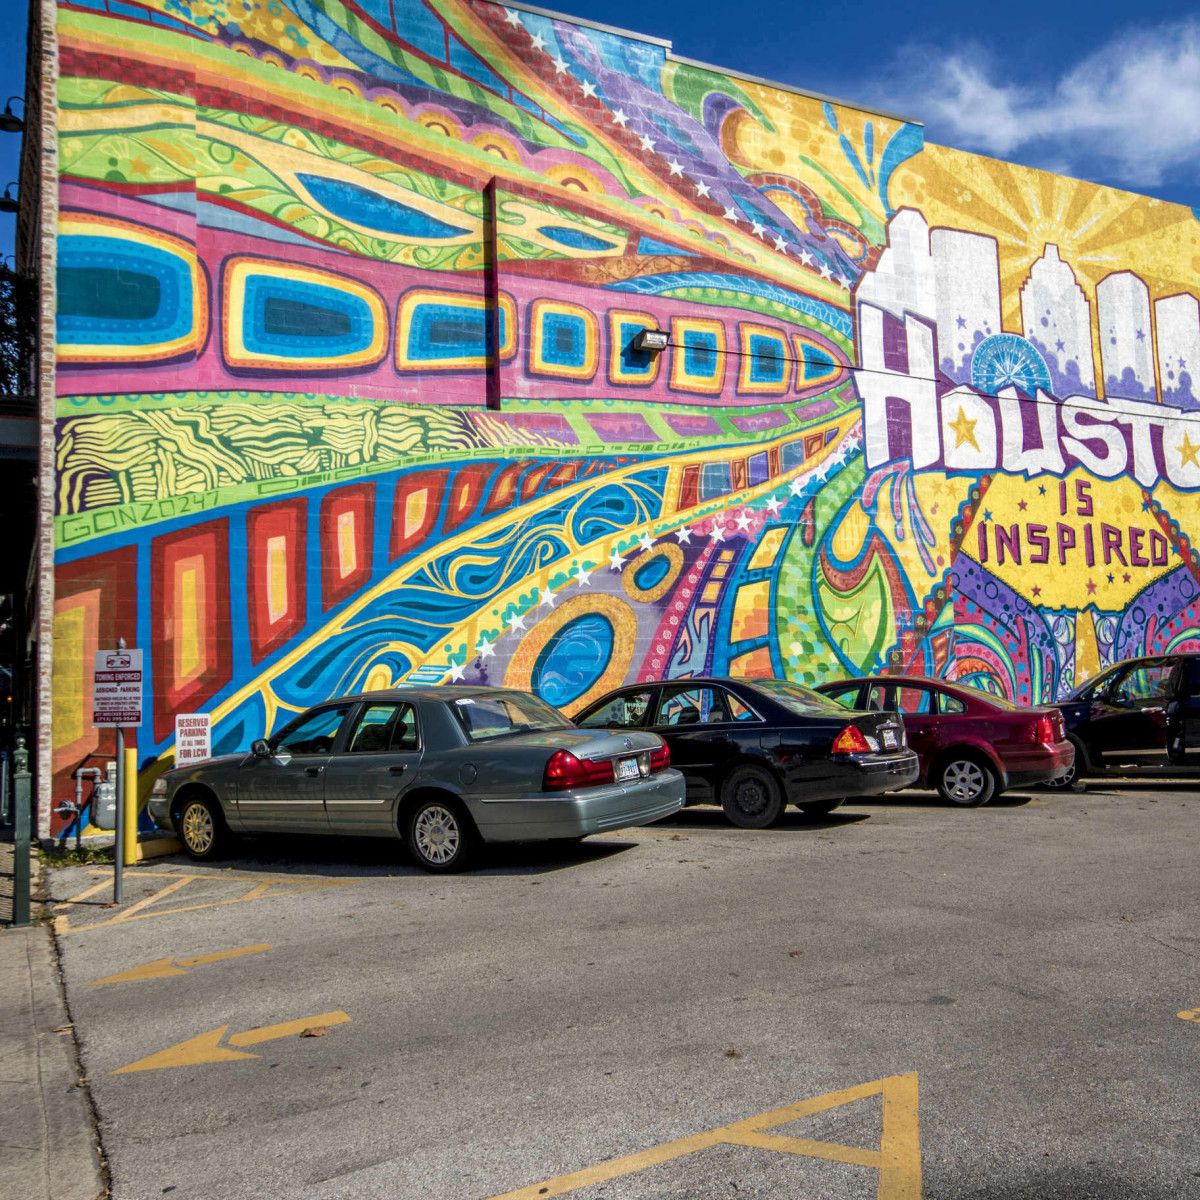 Explore These Offbeat Hidden Gems In Houston - The Good Life